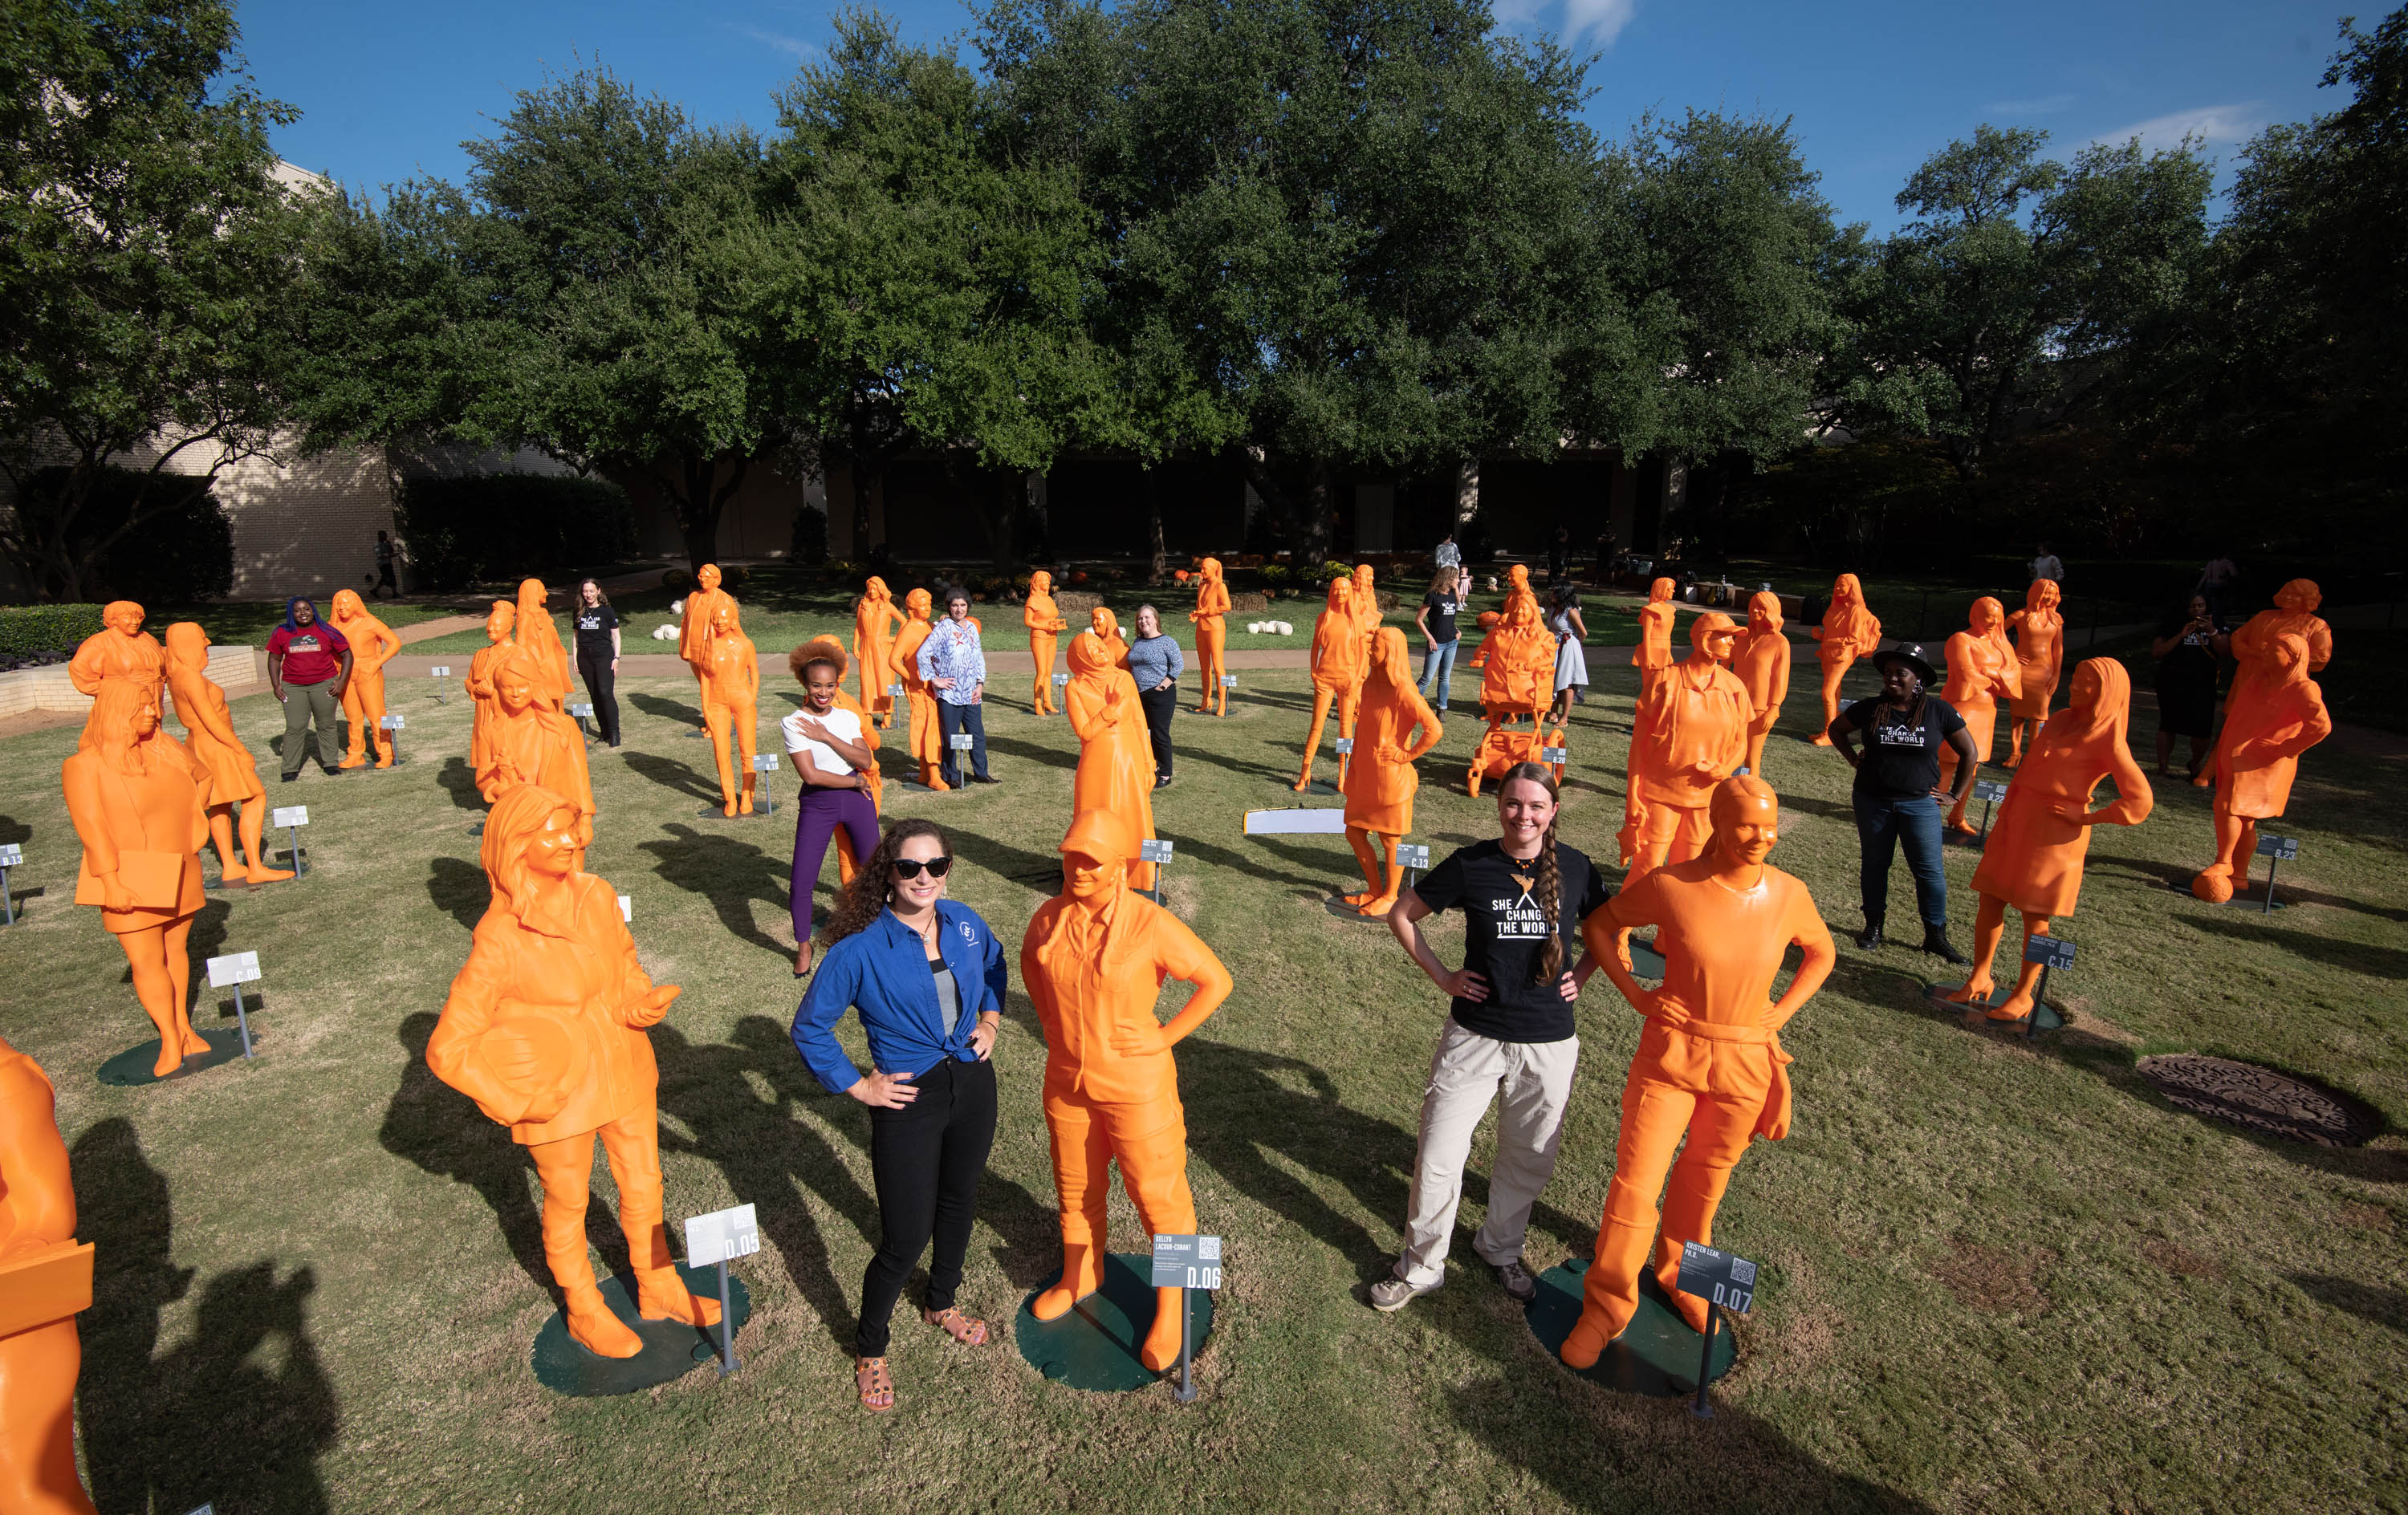 Group of orange, women statues in a open field along with two real humans